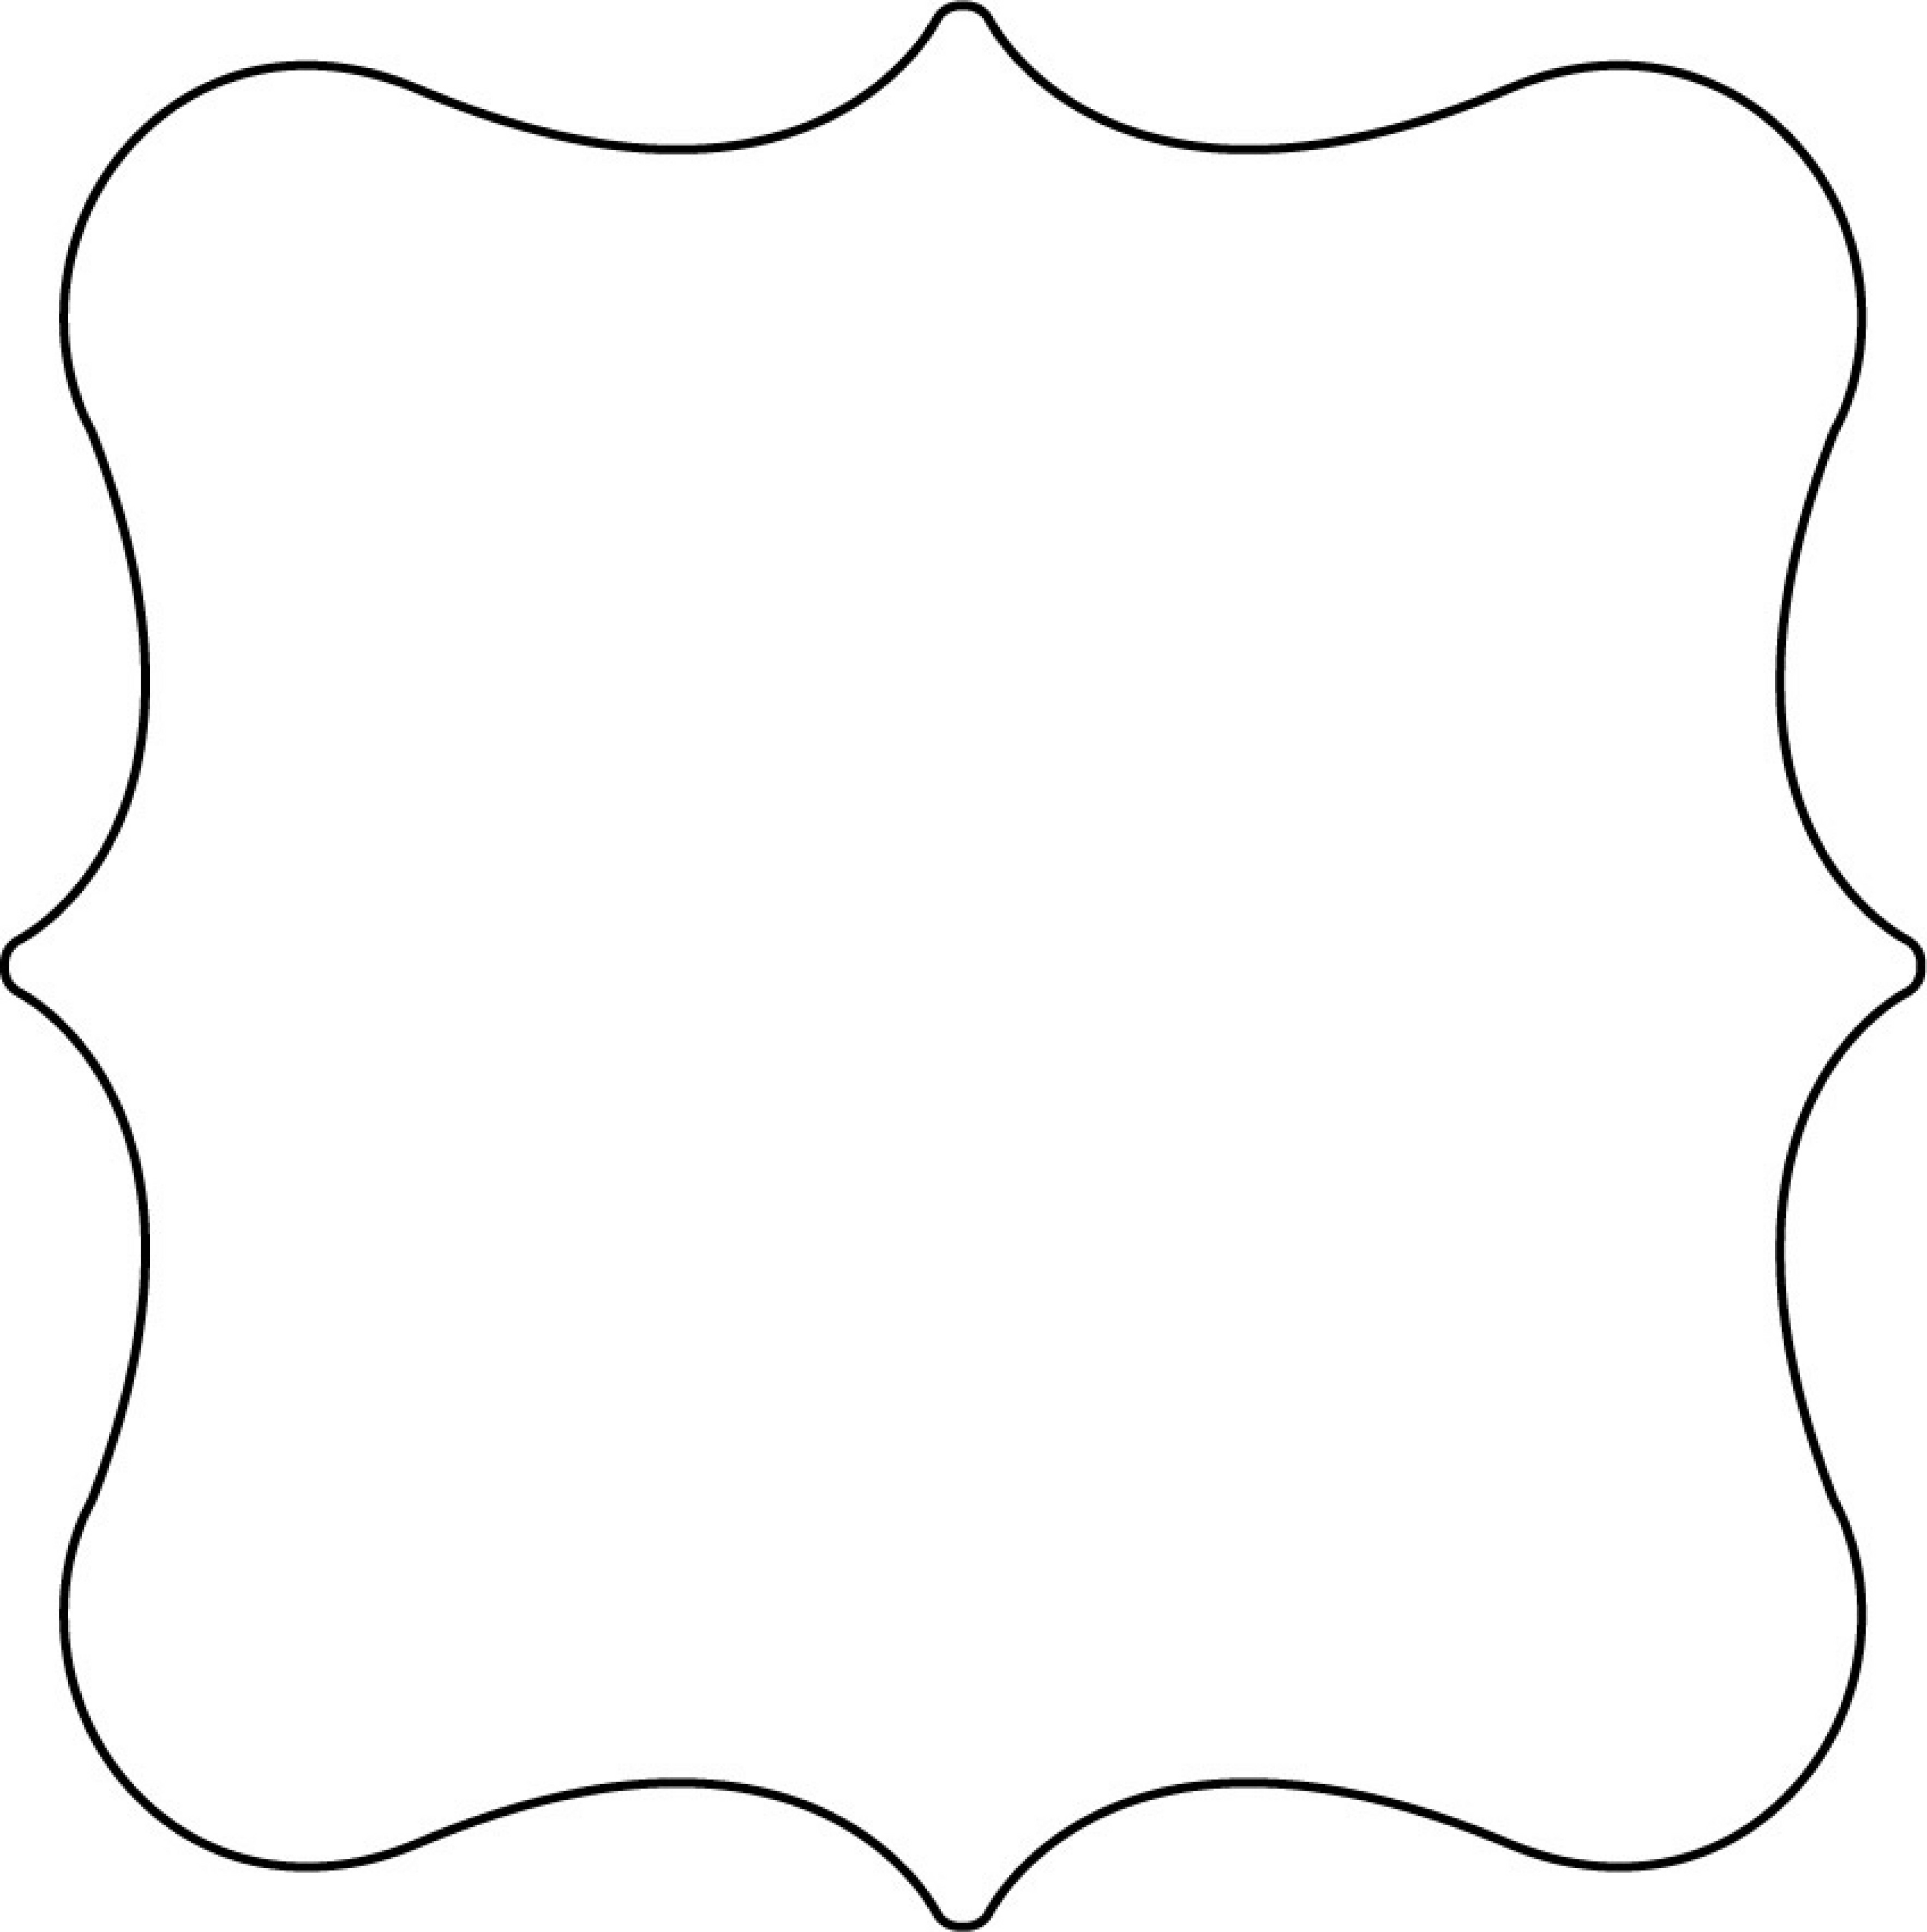 Free Label Shapes Cliparts, Download Free Clip Art, Free.